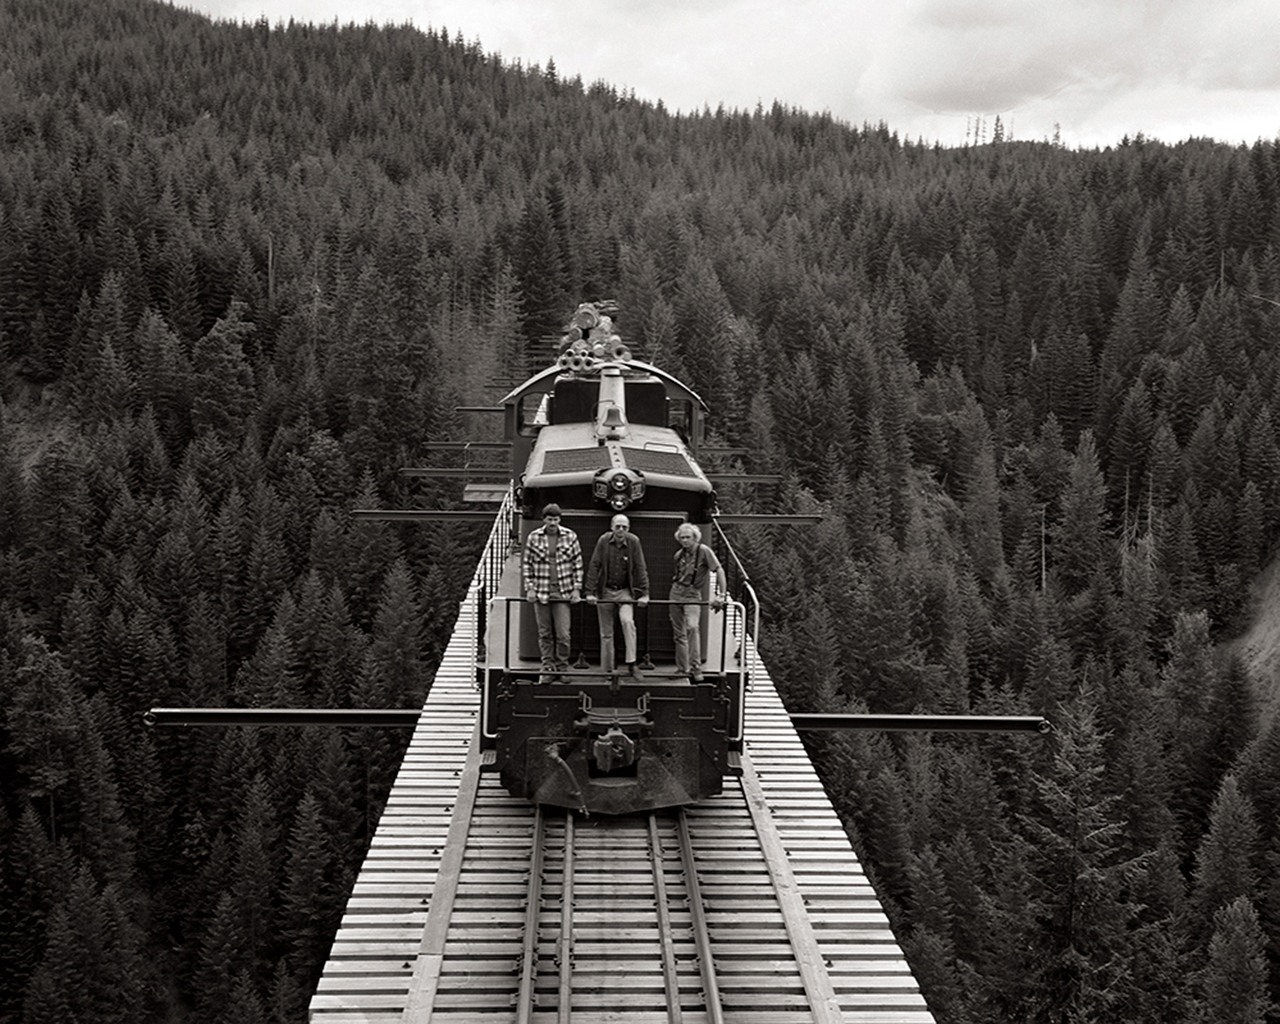 A photo taken by John Tylczak from the top of a caboose on the Simpson Logging Company’s Vance Creek railroad bridge, Aug. 9, 1985. From left to right, Simpson railroad crew members Todd Young, Pete Replinger and Ed Nelson.